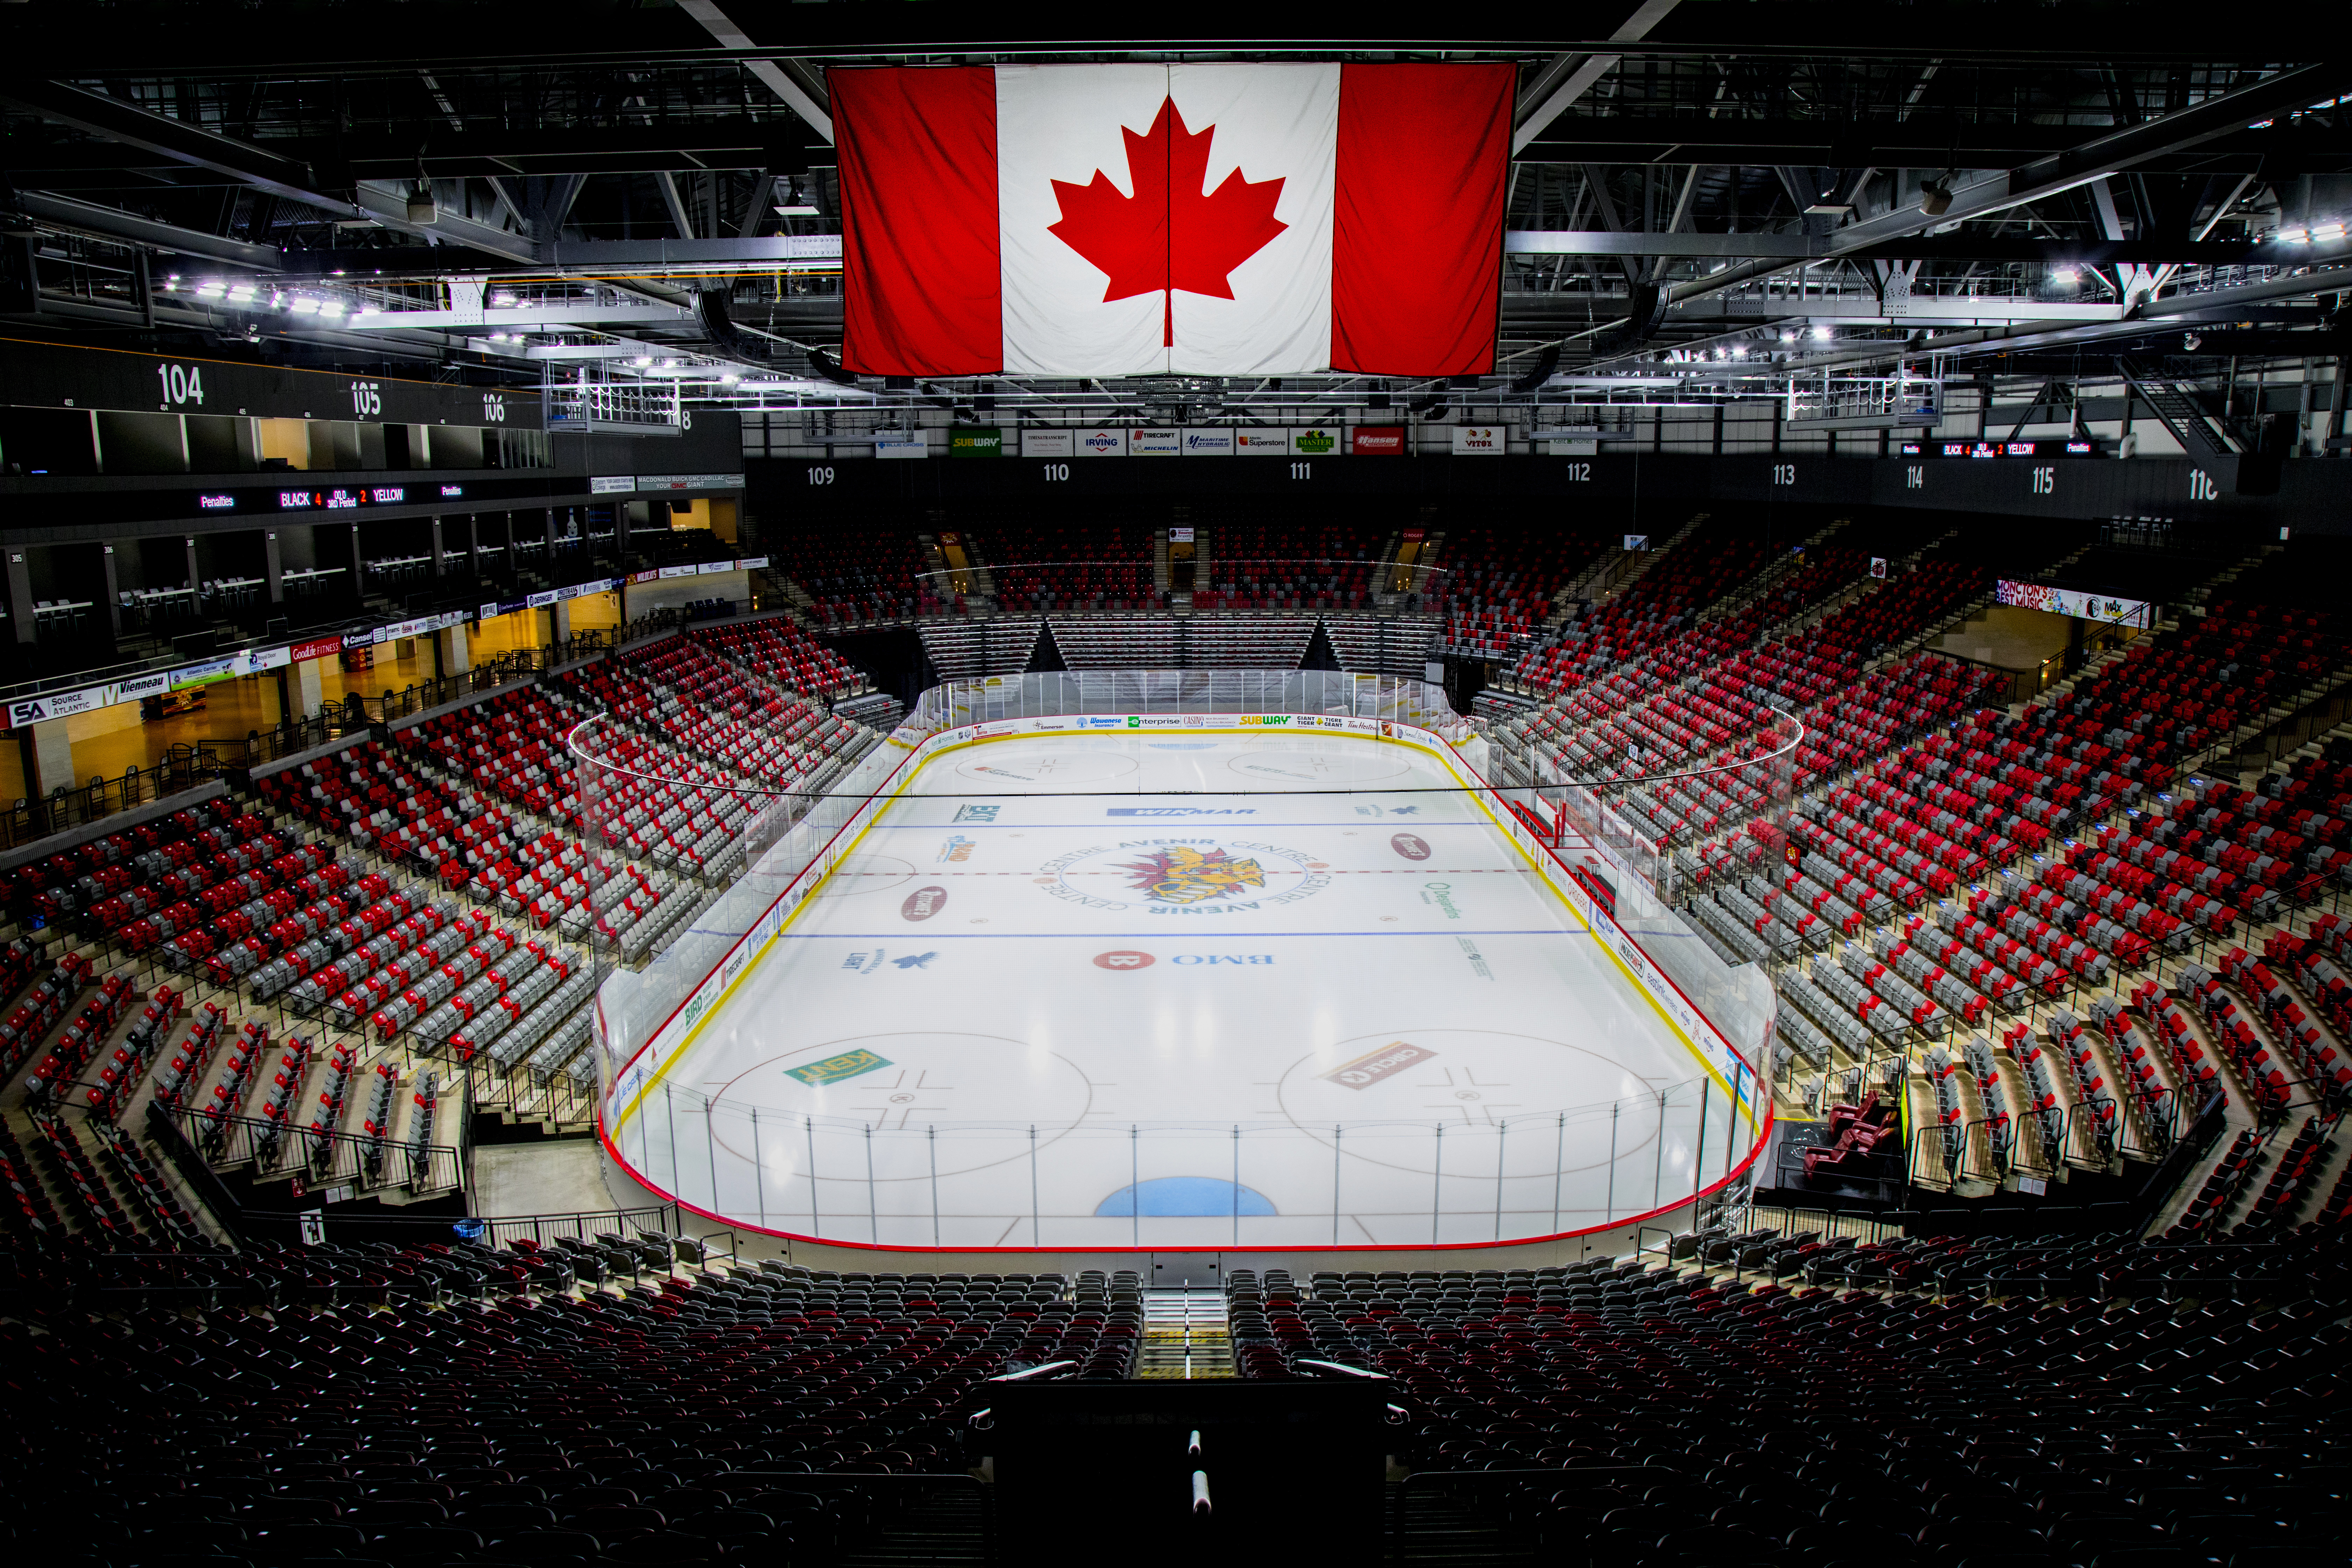 HARMAN Professional Solutions Delivers High-Impact Sound at Canada’s Avenir Centre Arena